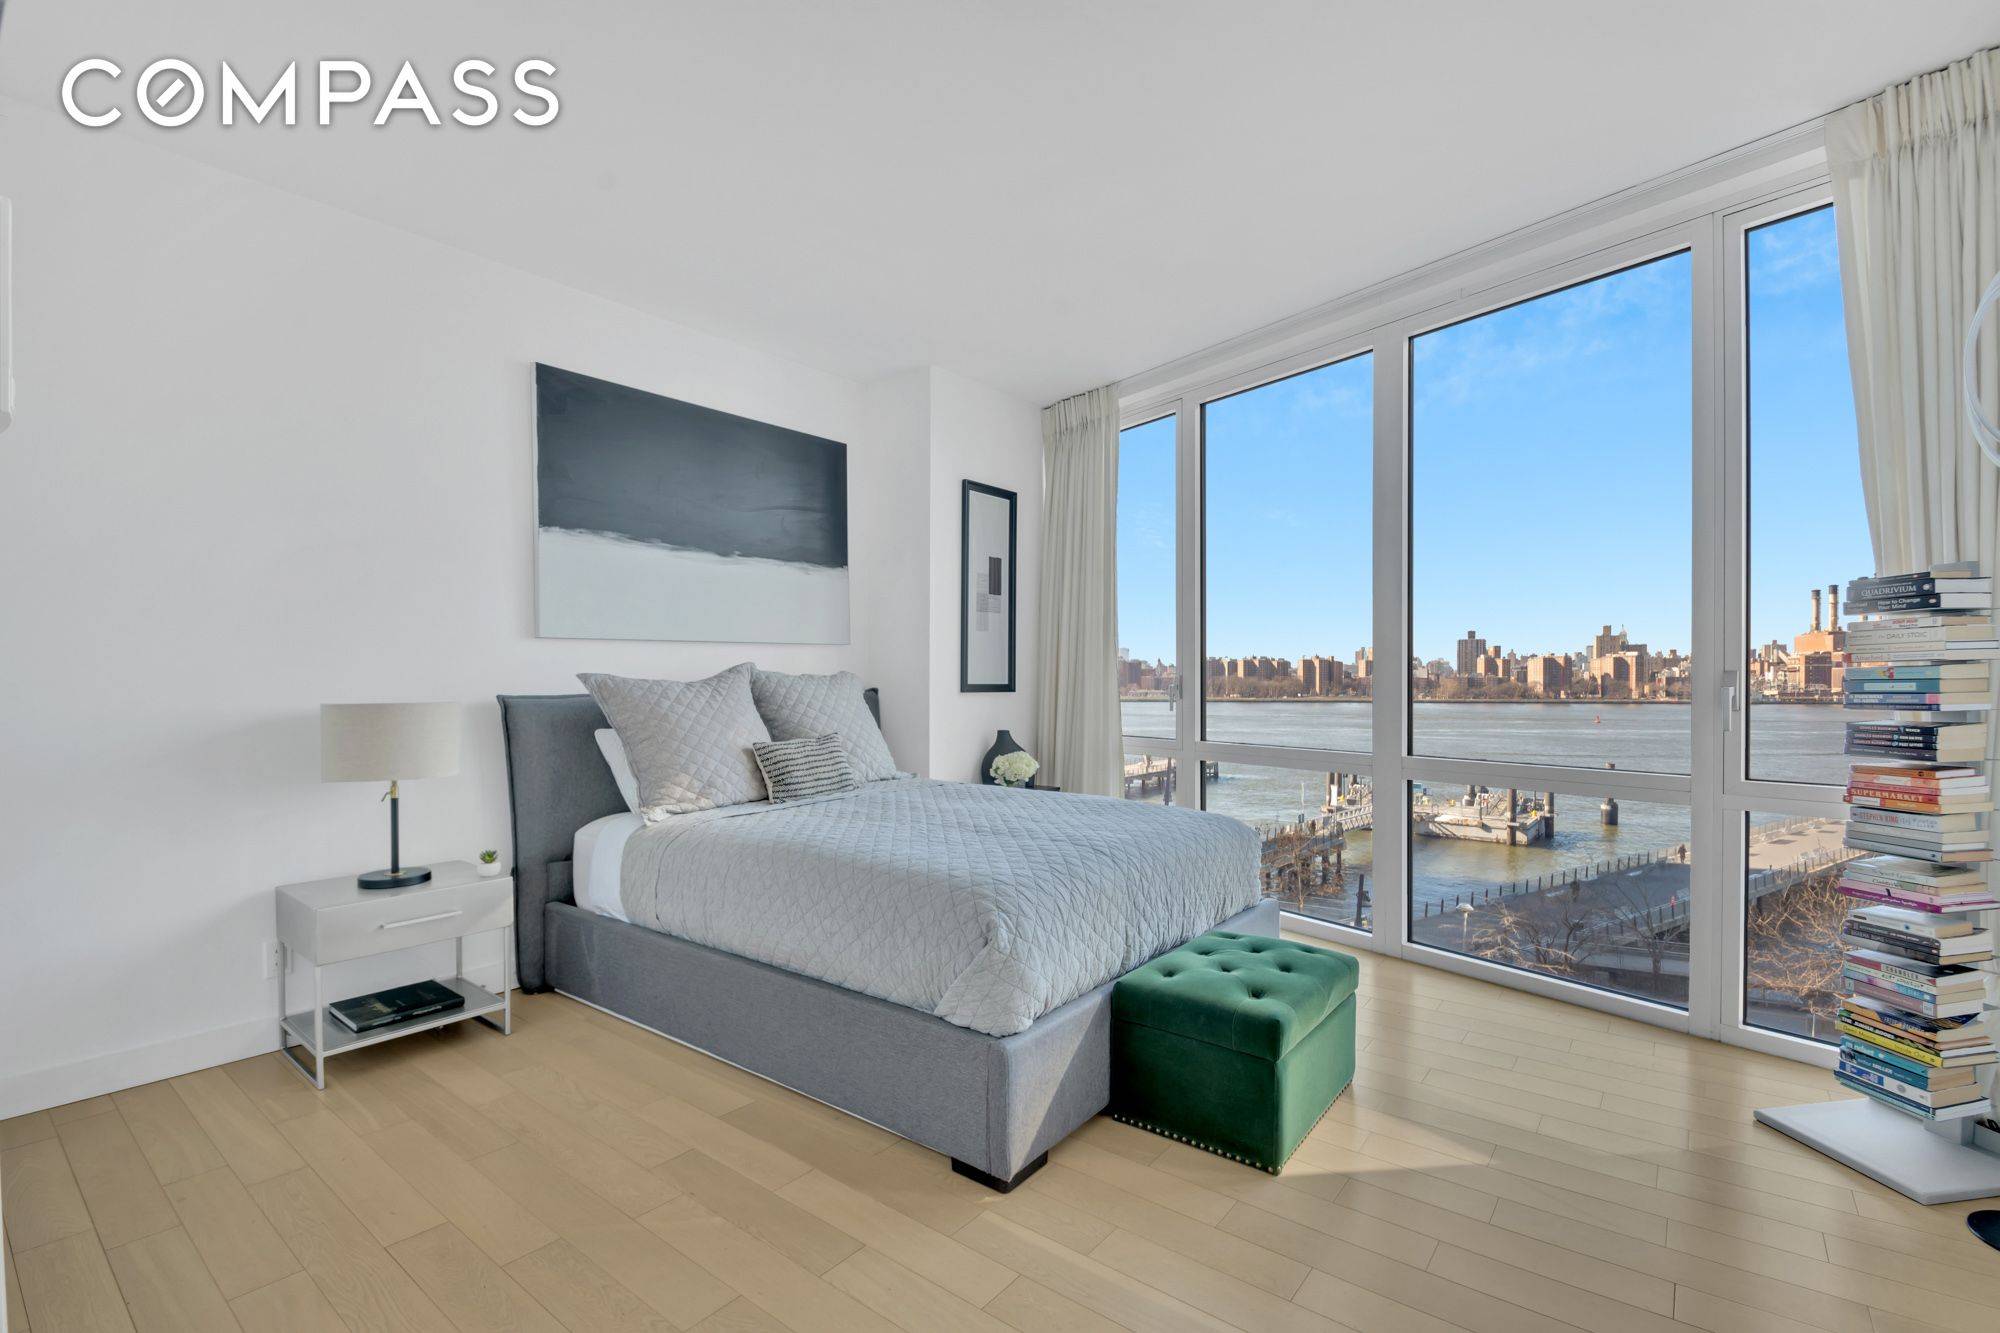 Deal Fell Through. An incredible opportunity at The Edge with unobstructed views of Manhattan !